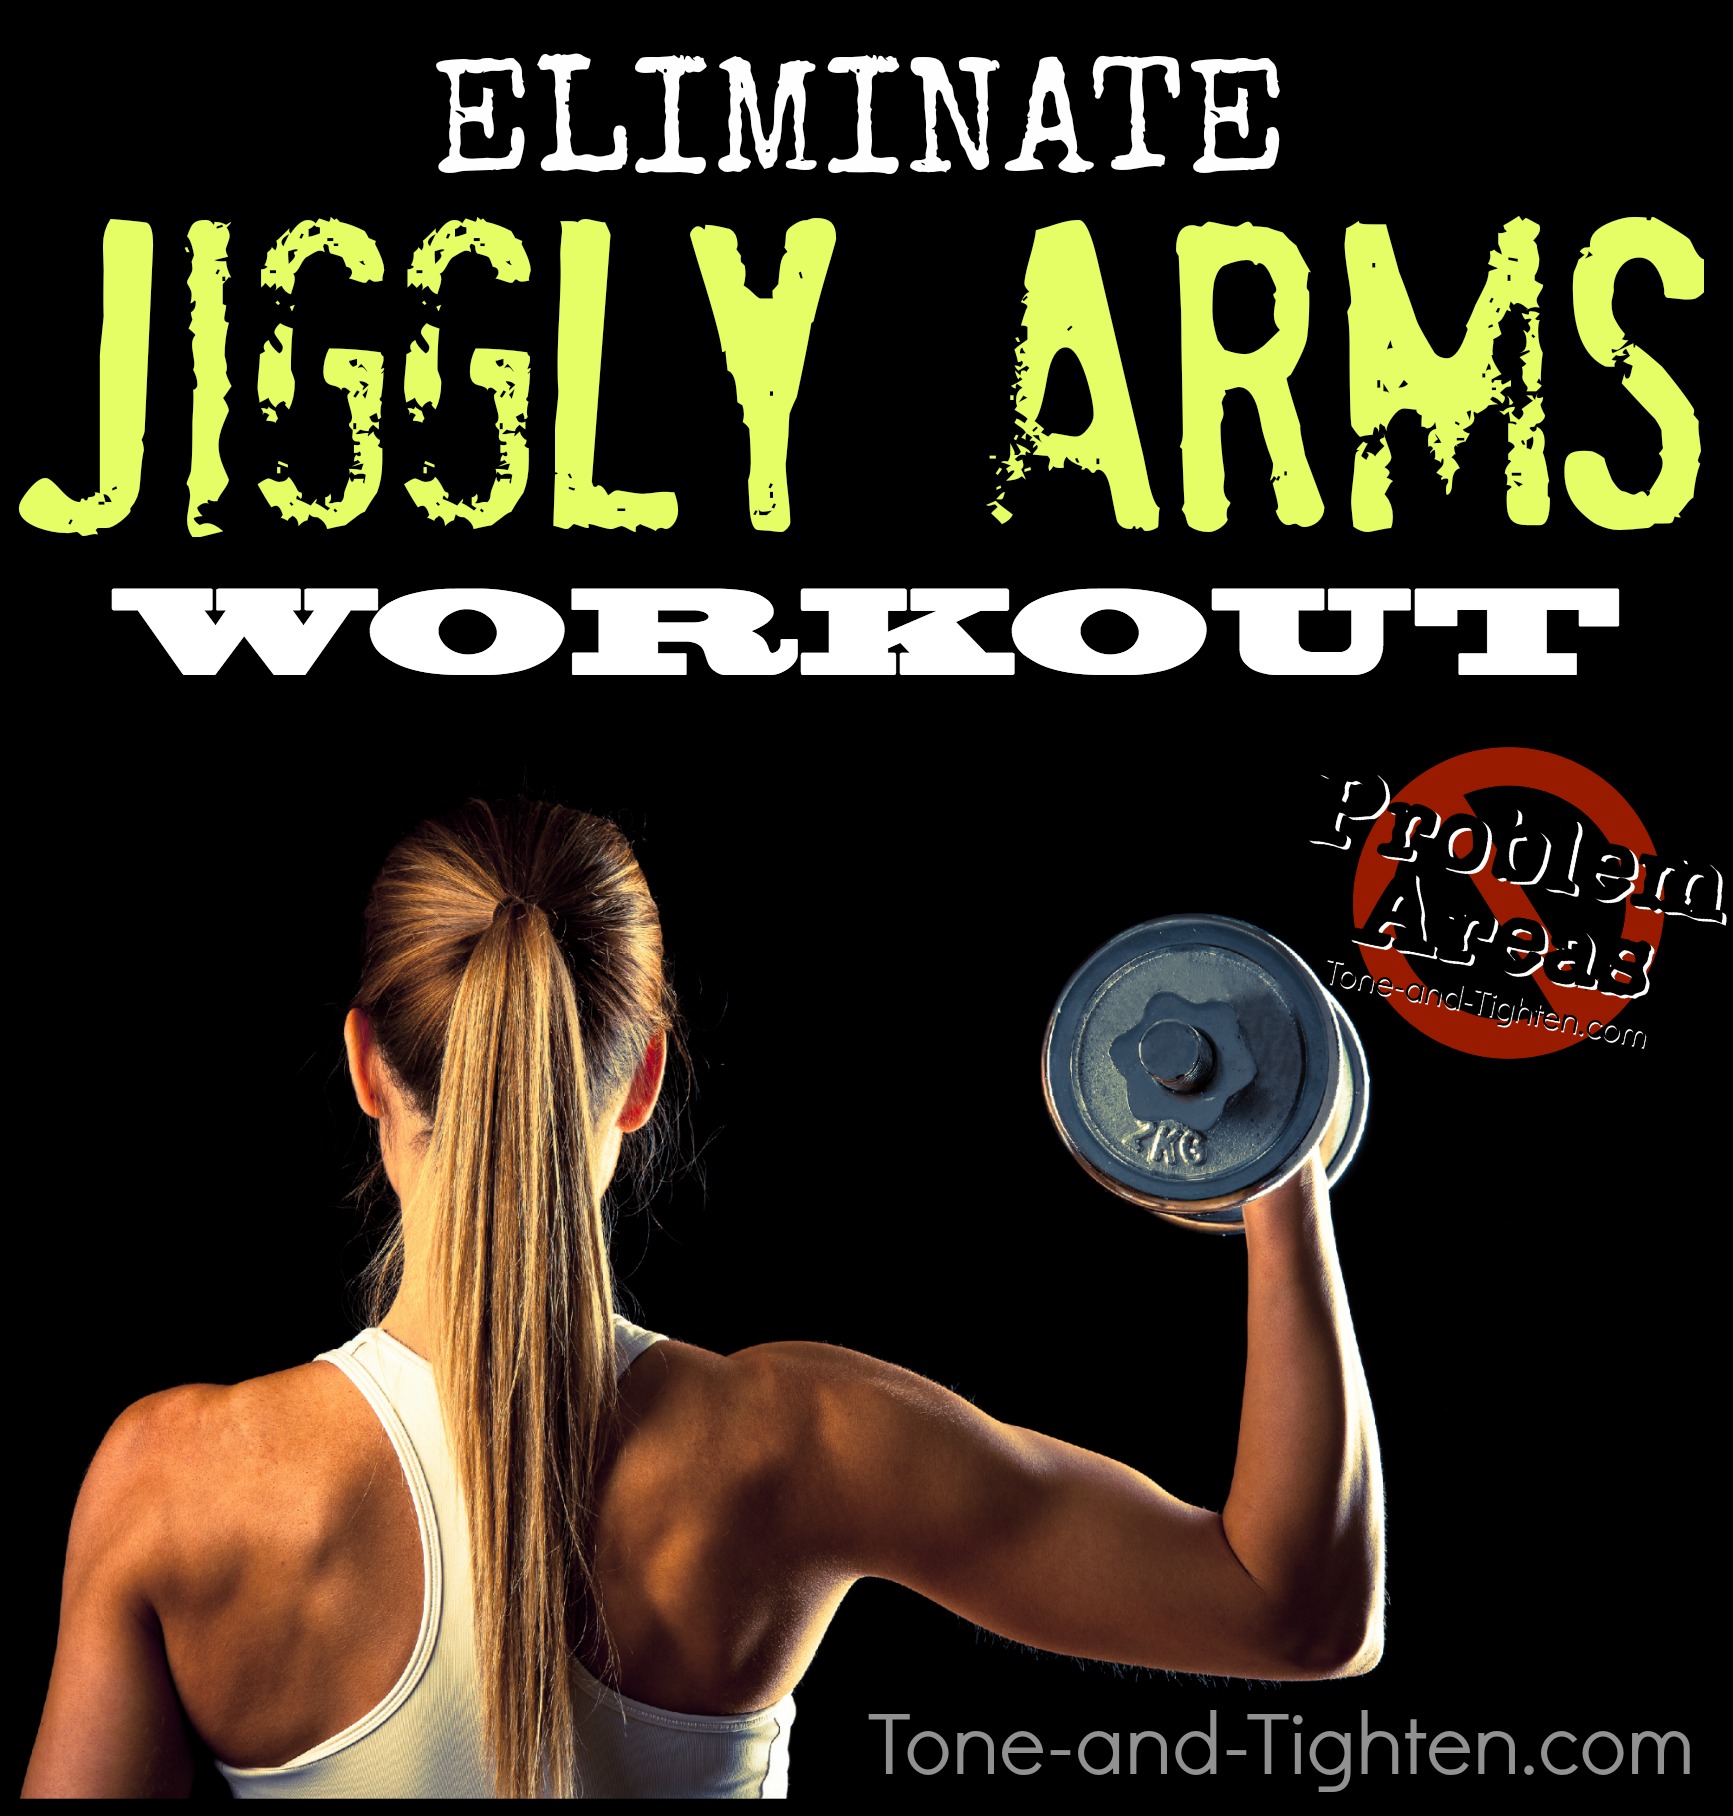 Eliminate Jiggly Arms with this amazing at-home workout with weights!